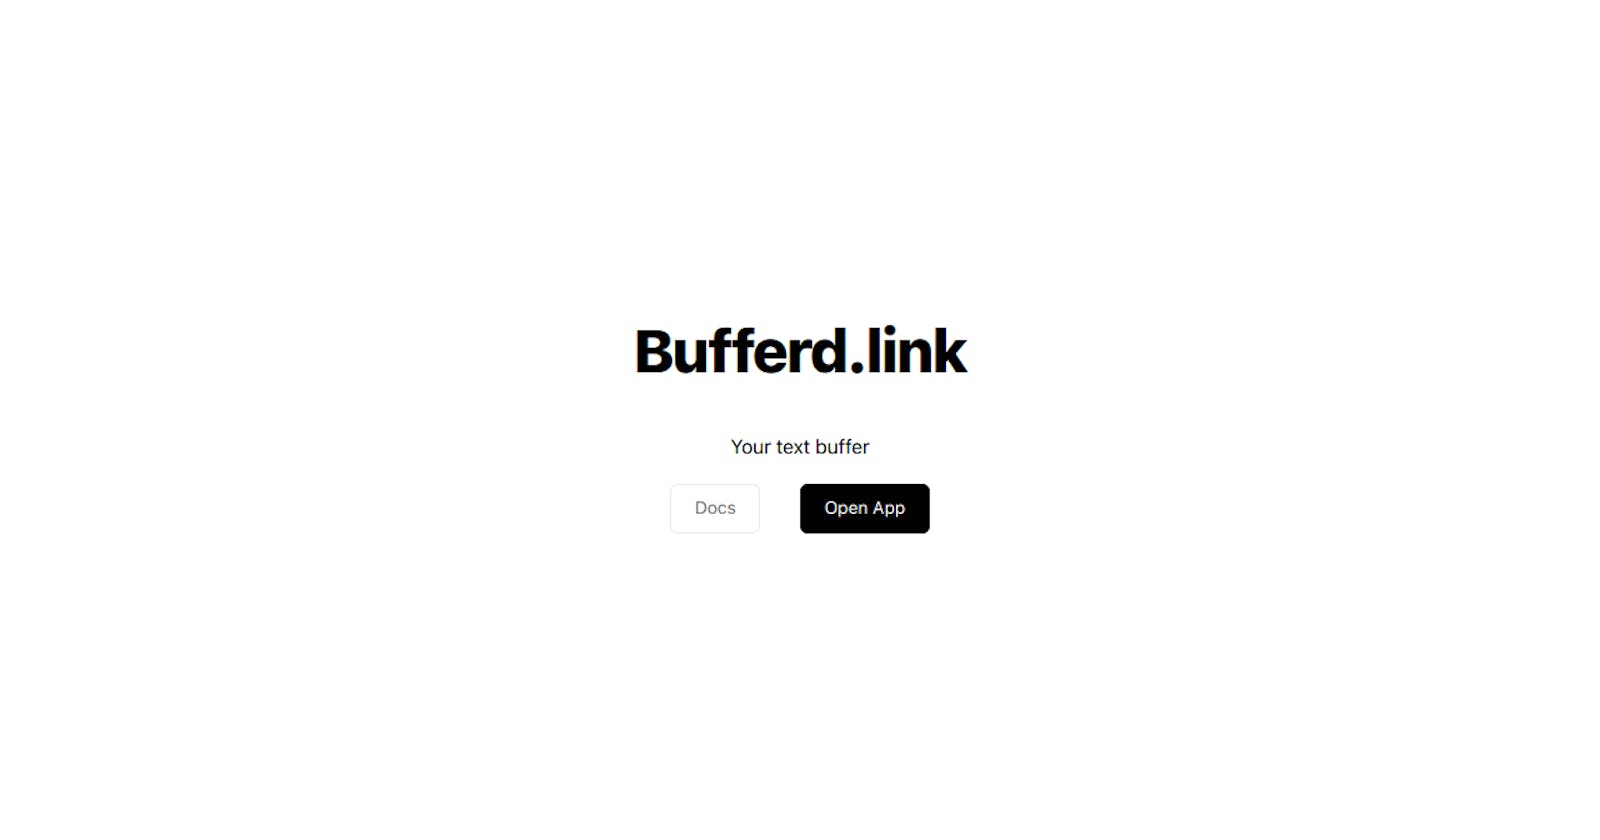 Introducing Buffered.link